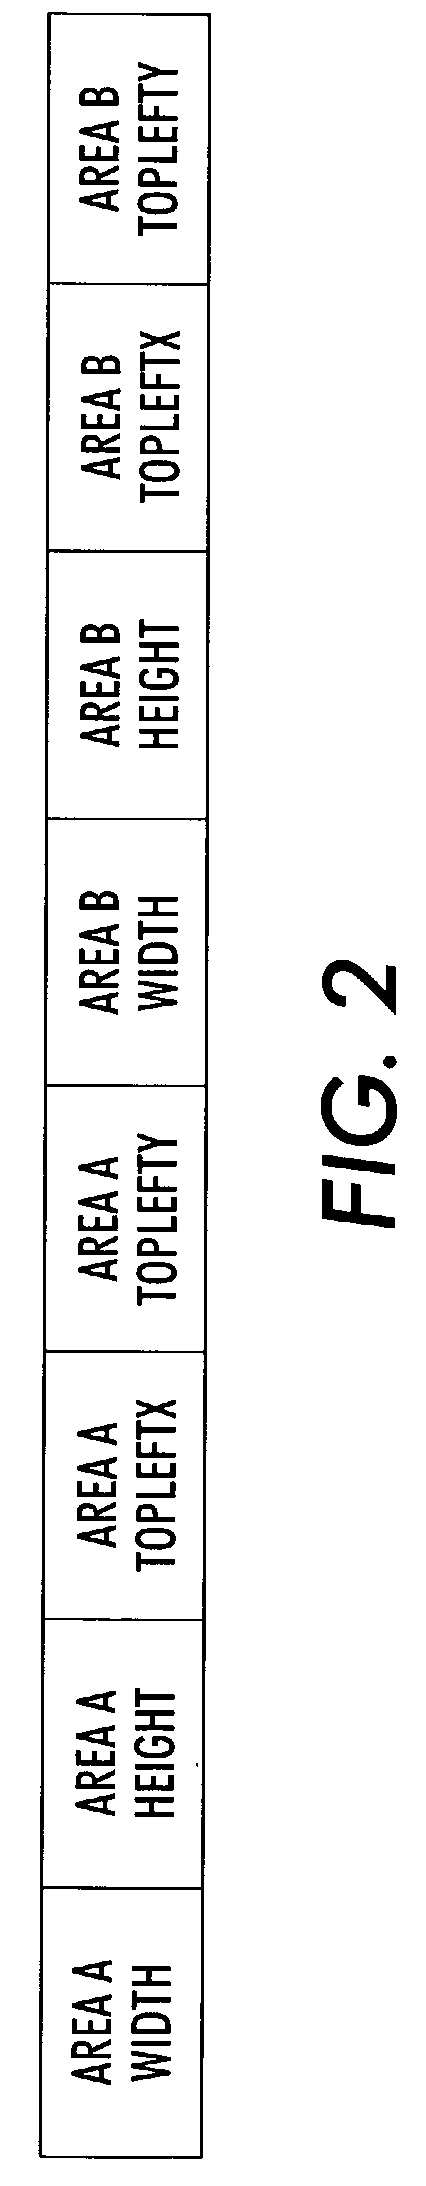 Constraint-optimization system and method for document component layout generation